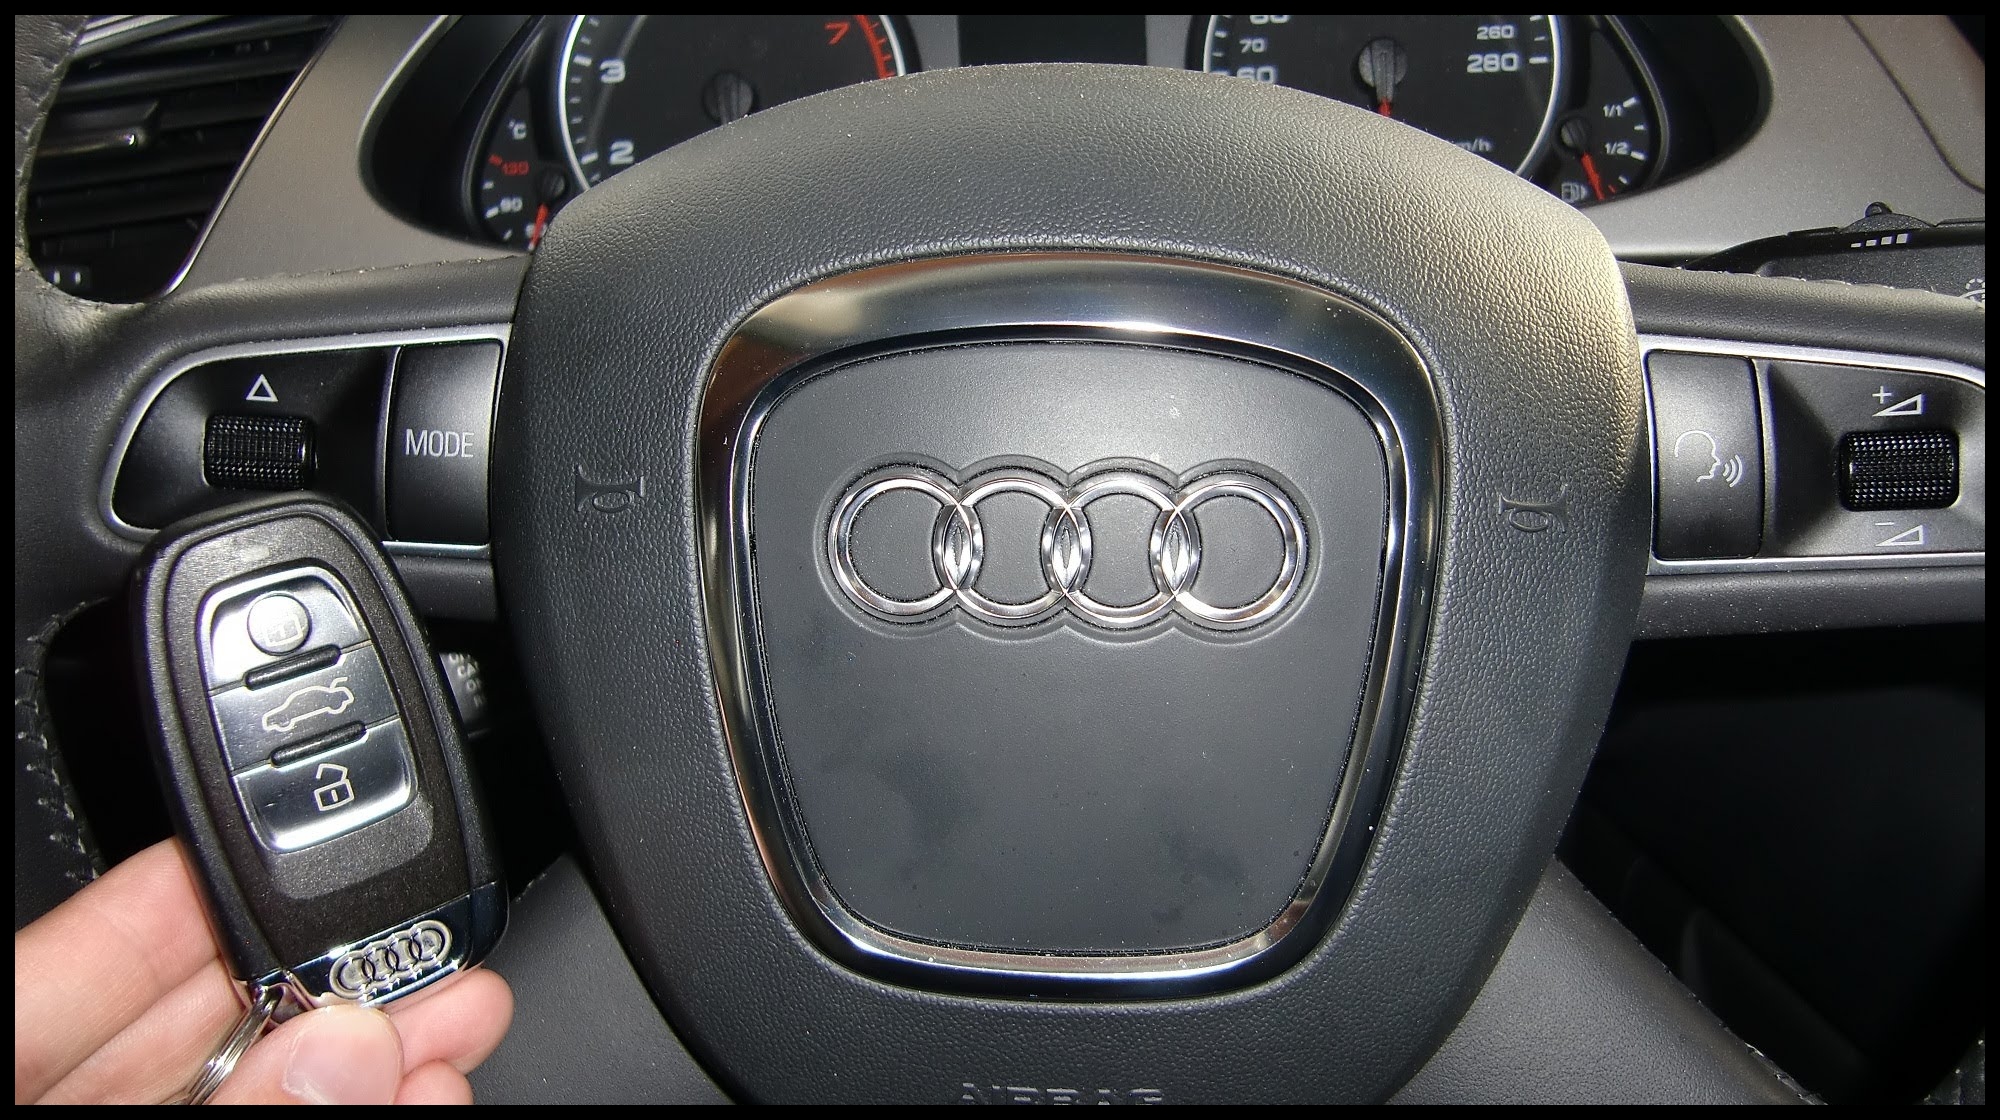 How to start an Audi A4 2009 and others with ignition key how to use wie starten